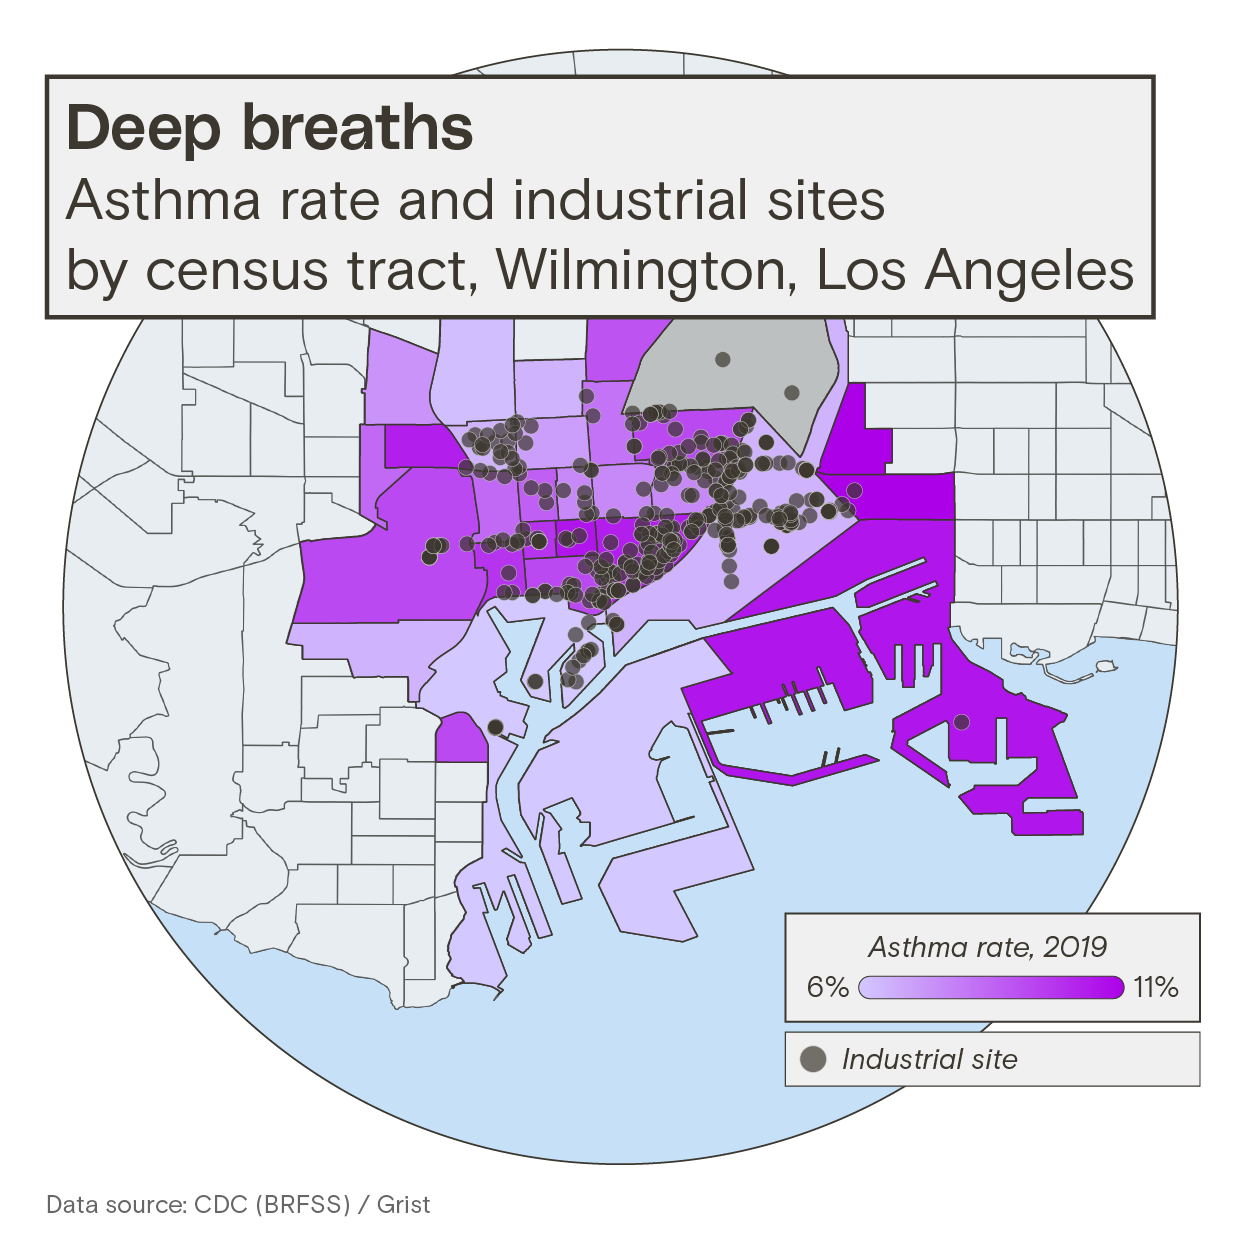 A map showing asthma rates and industrial sites by census tract in Wilmington, Los Angeles. Higher rates tend to occur in tracts with more industrial sites.